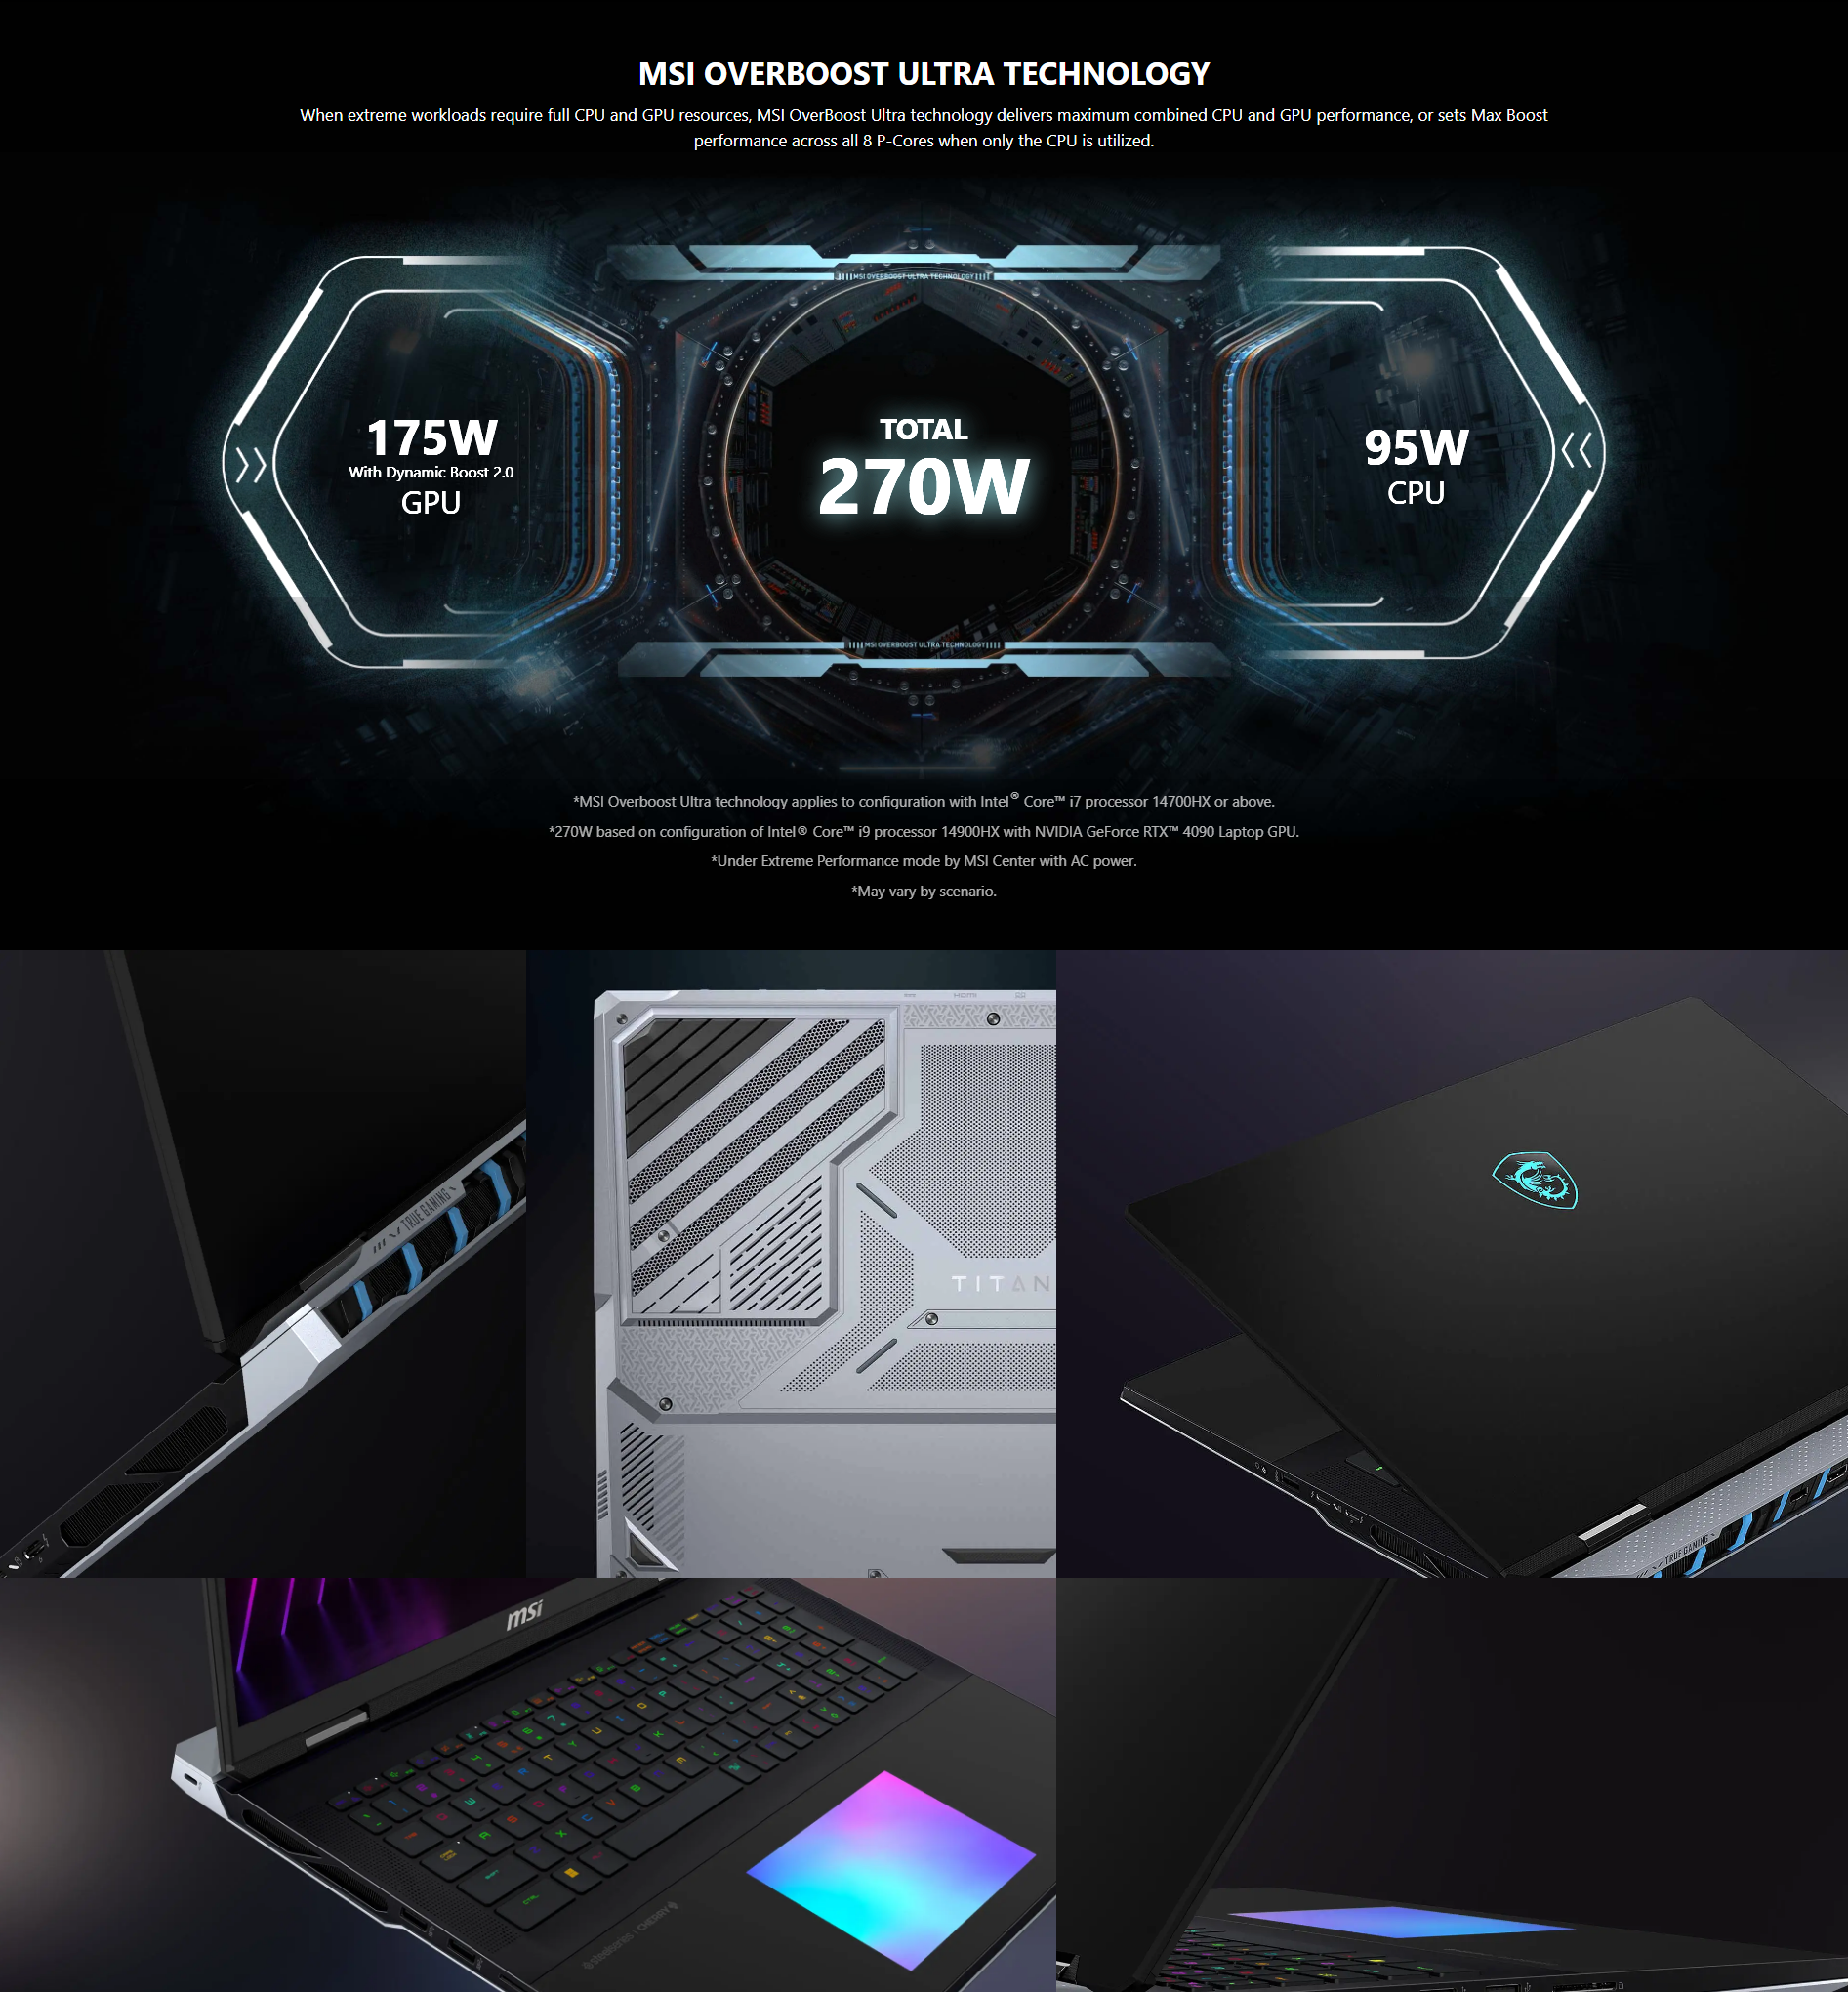 A large marketing image providing additional information about the product MSI Titan 18 HX A14VIG-053AU 18" MiniLED 120Hz 14th Gen i9 14900HX RTX 4090 Win 11 Gaming Notebook - Additional alt info not provided